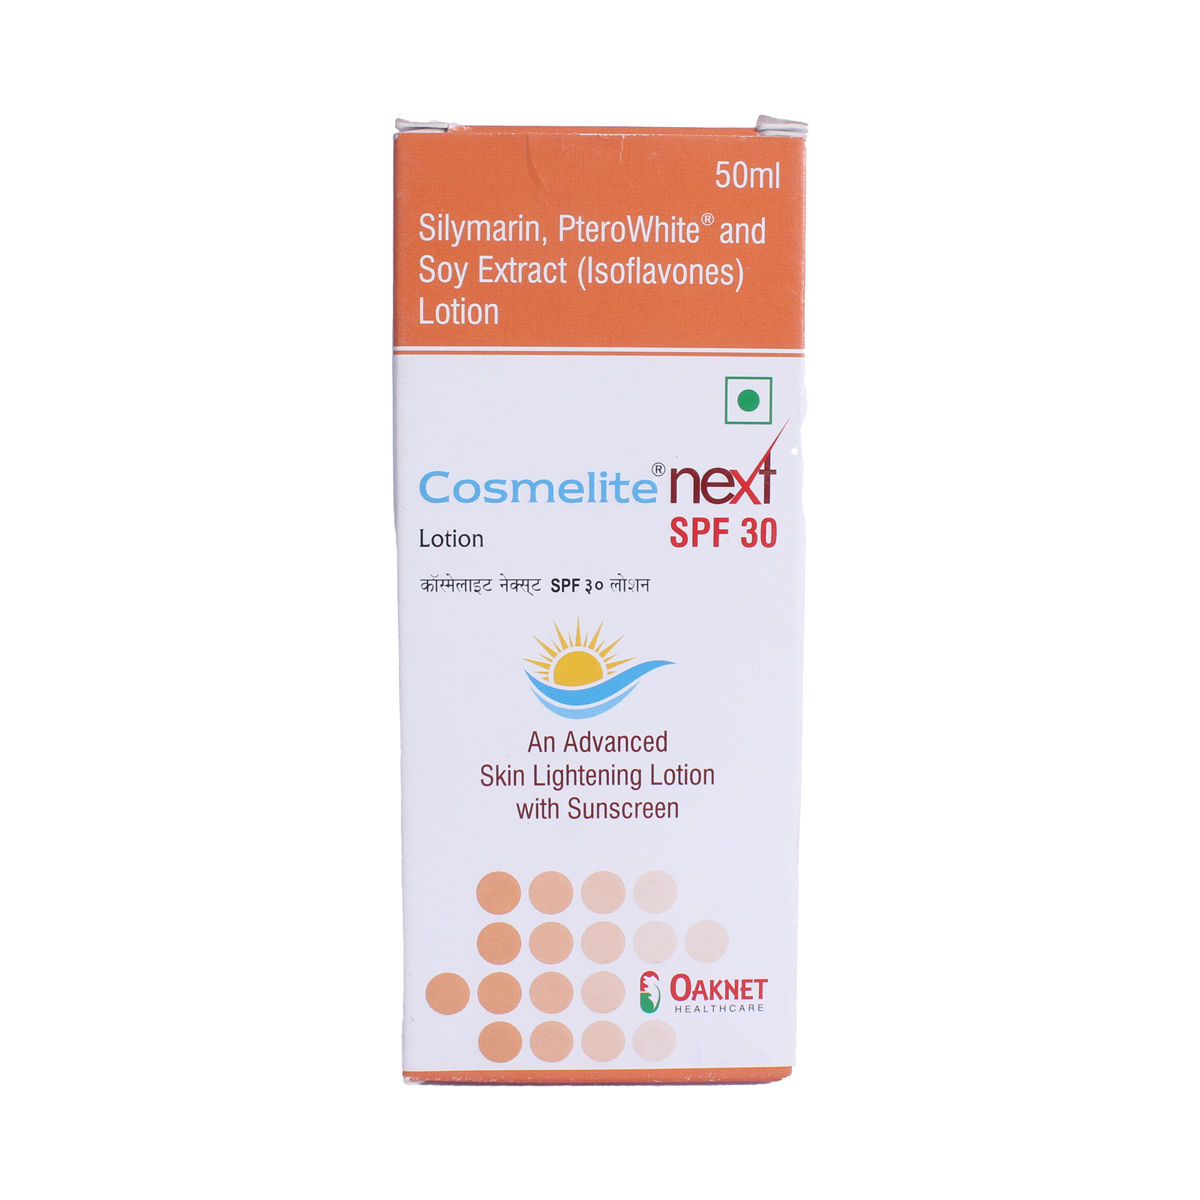 Cosmelite Next SPF 30 Lotion 50 ml, Pack of 1 